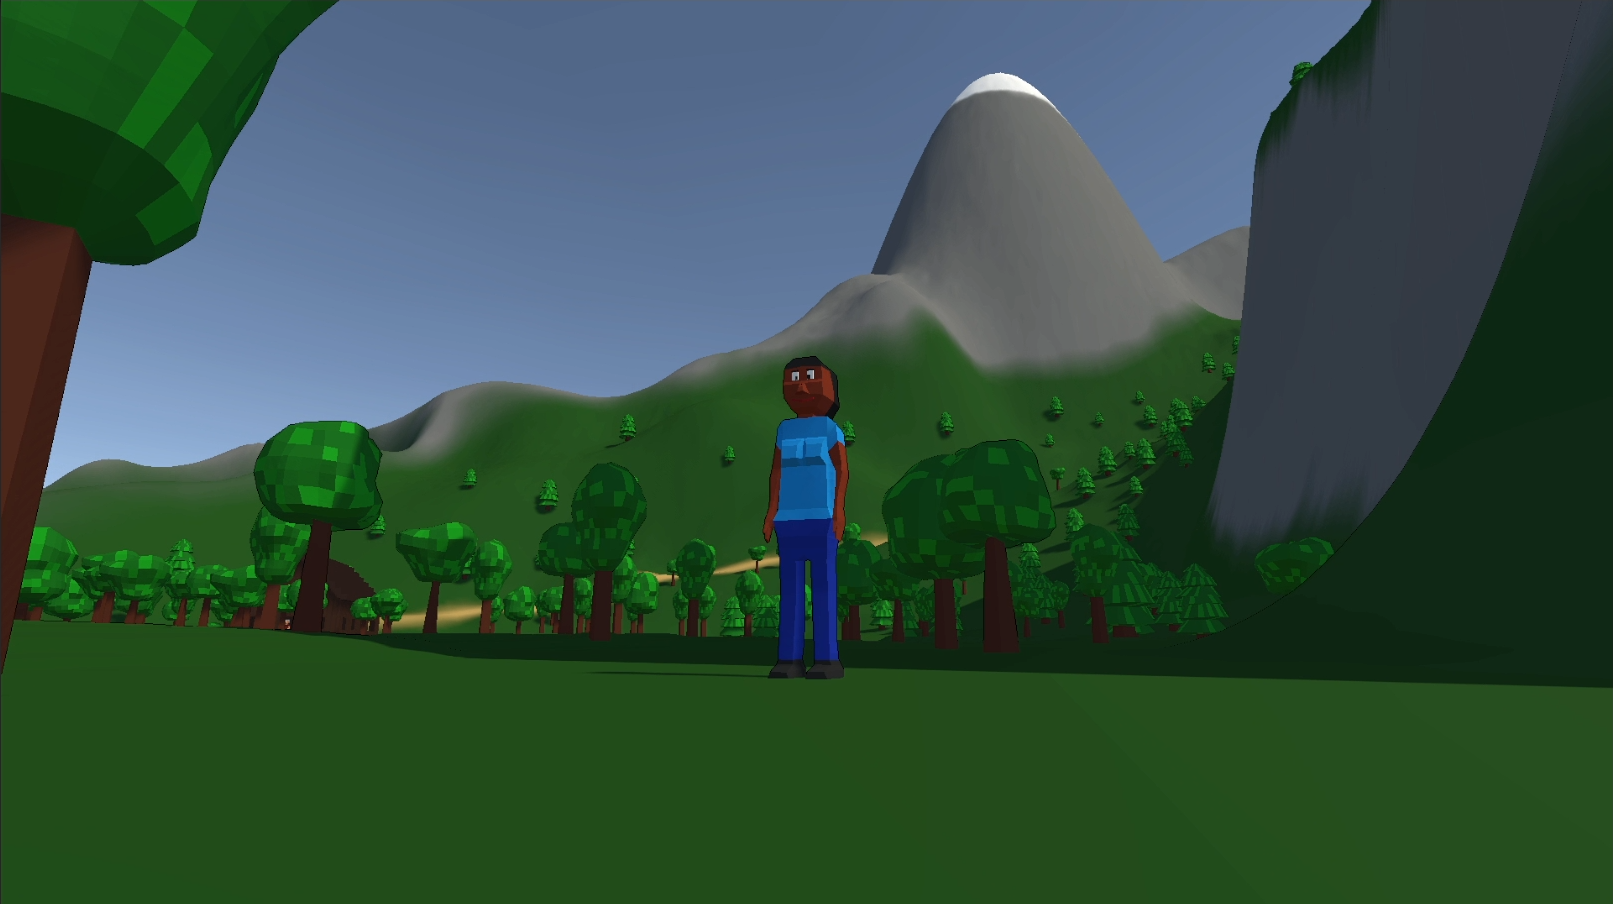 Screenshot: Player standing in the forest, mountain in the background